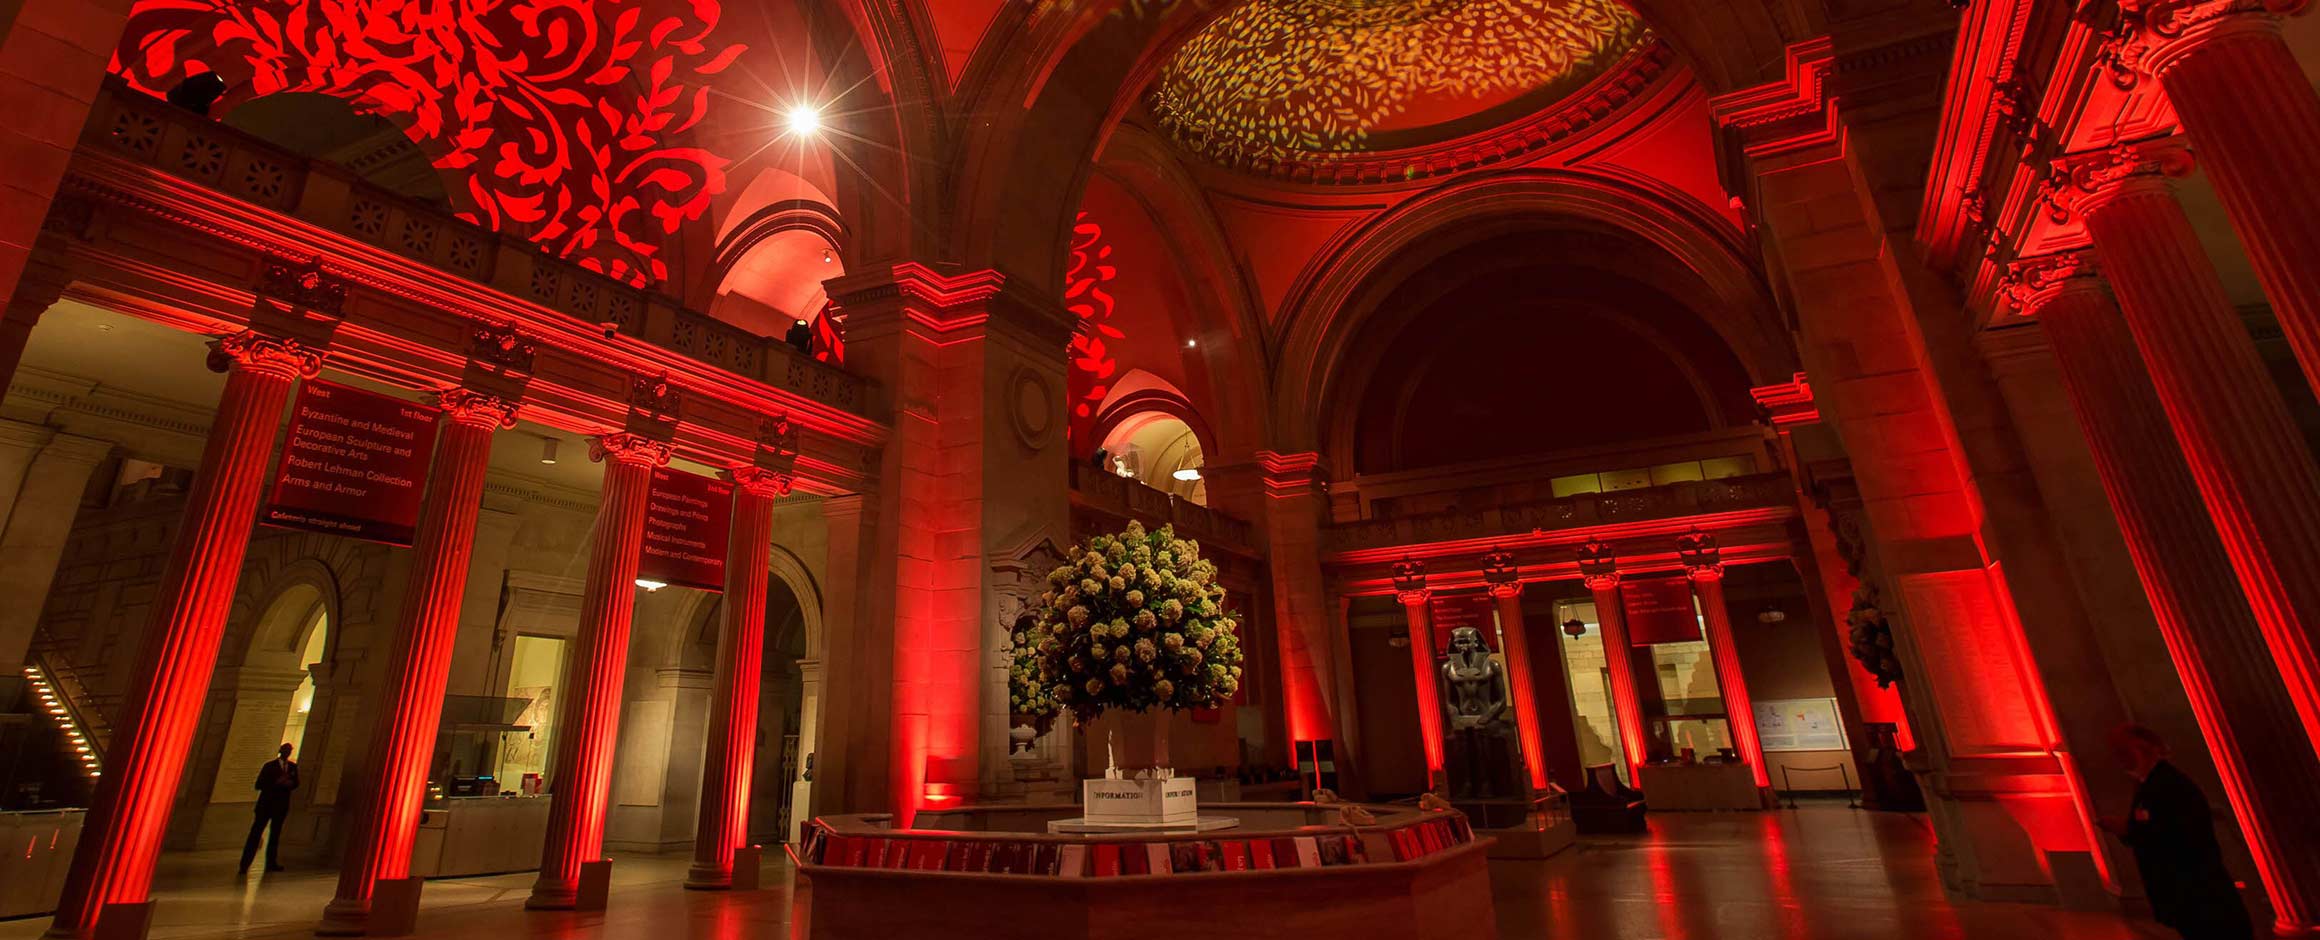 A vase with green foliage stands in the center of a grand arched foyer lit up with red lights